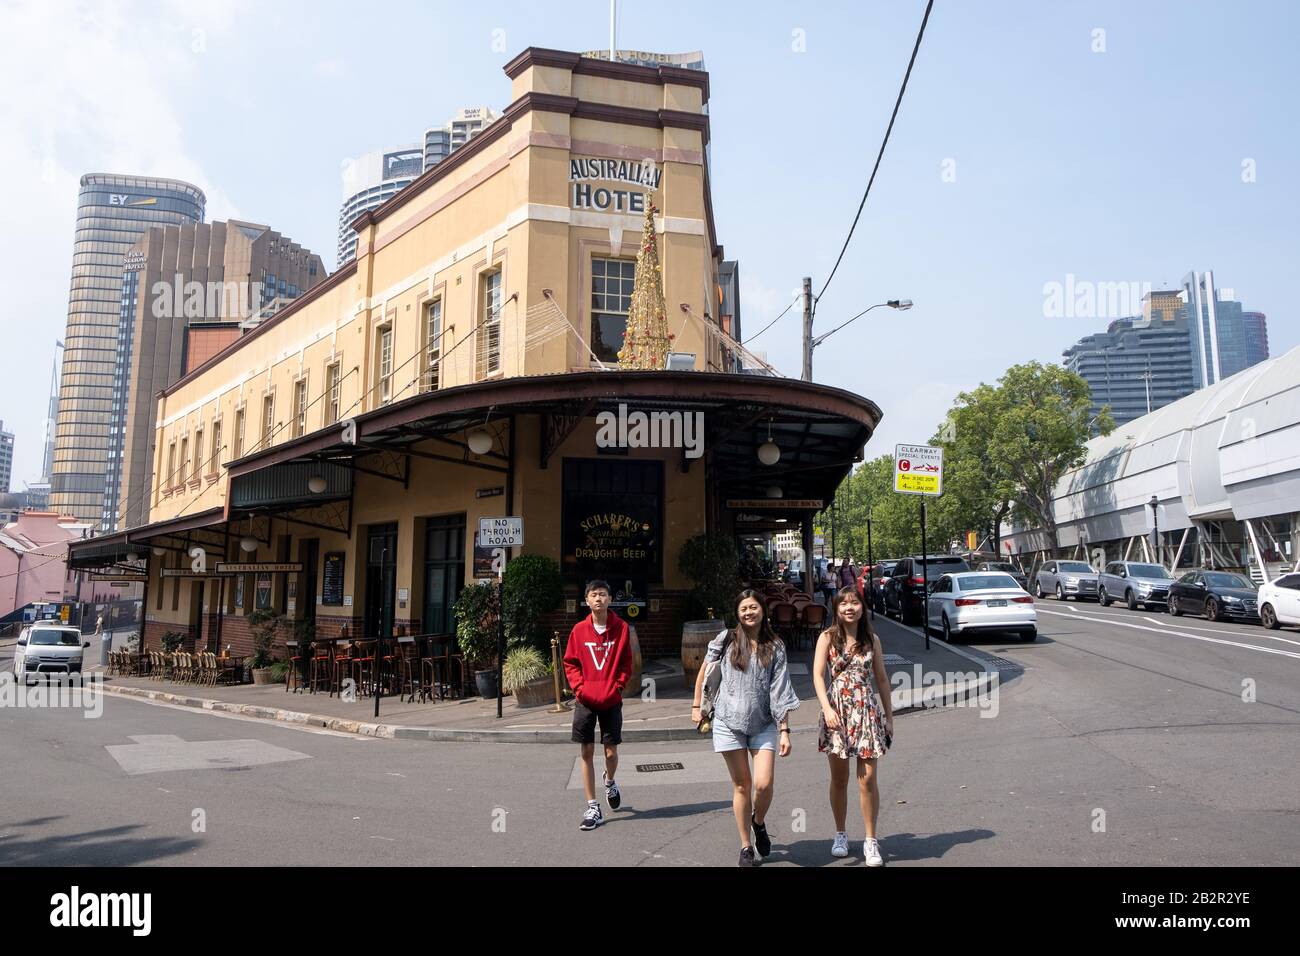 SYDNEY, AUSTRALIA - Dec 07, 2019: The Australian Heritage Hotel is one of  Sydney's oldest pubs, located in The Rocks Stock Photo - Alamy